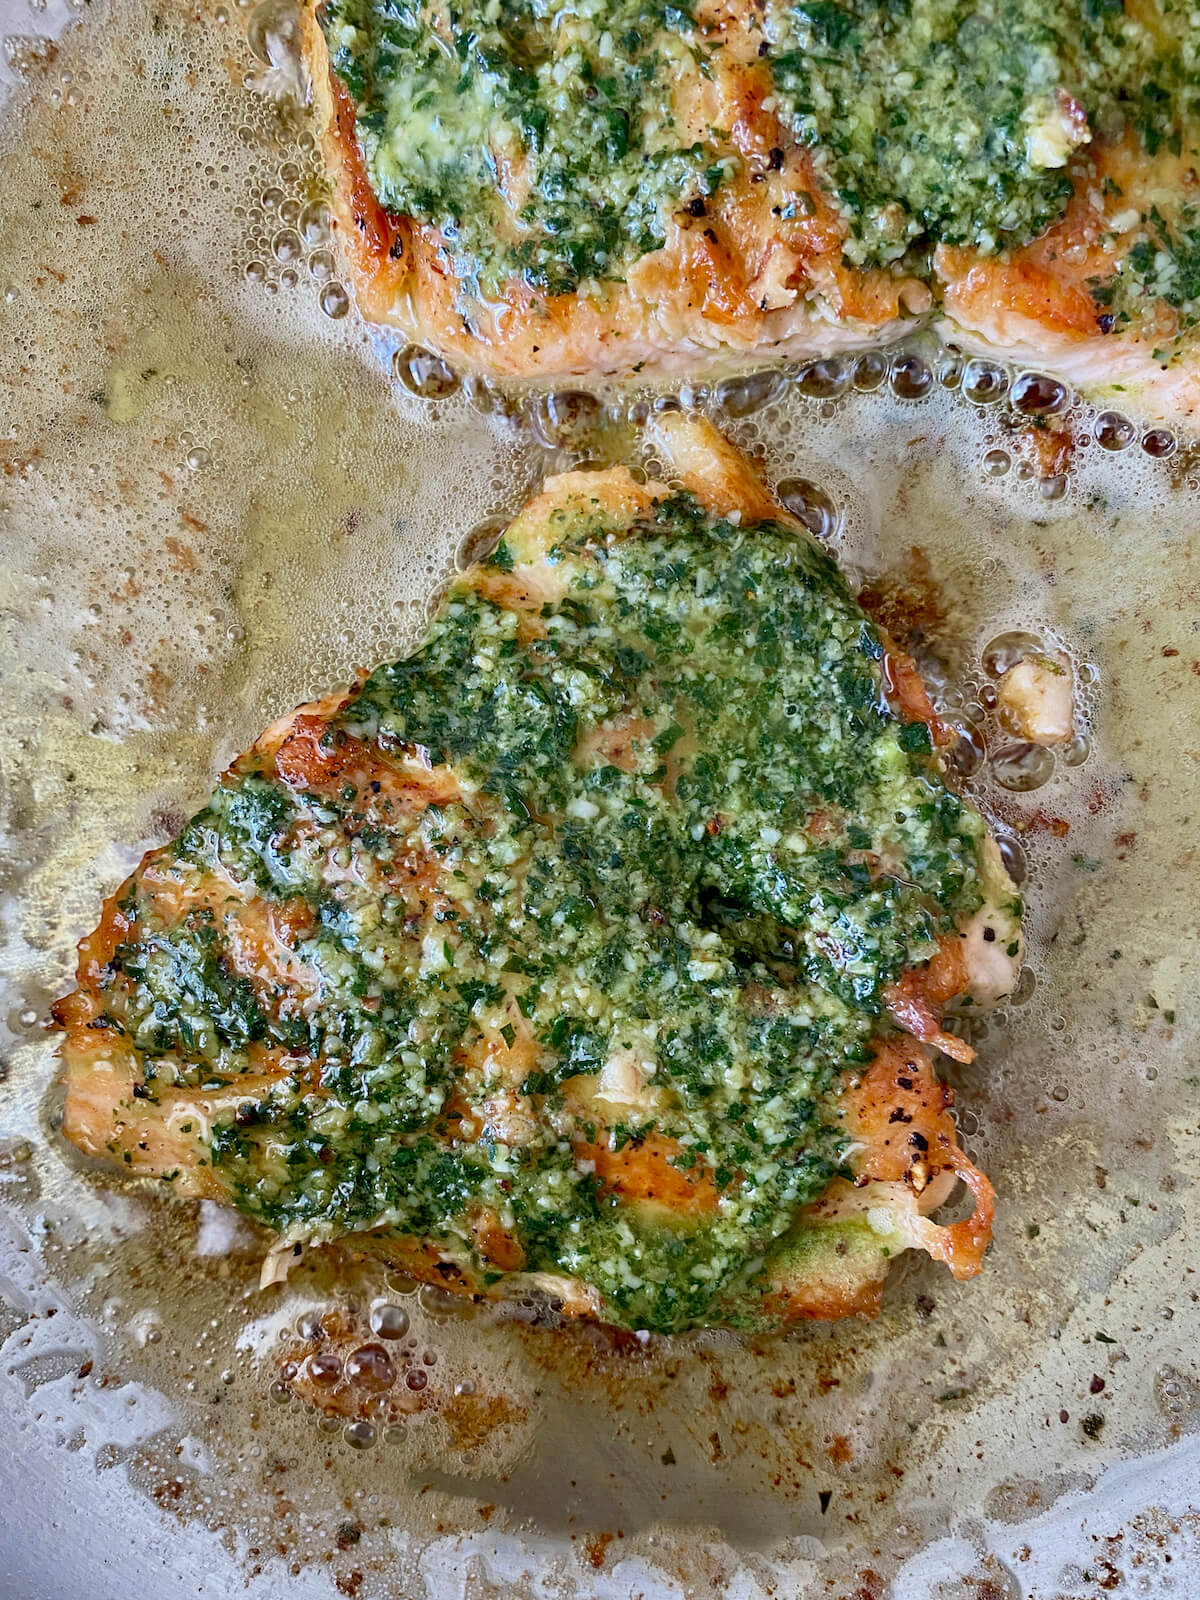 Salmon coated with pesto butter cooking in a stainless steel skillet.